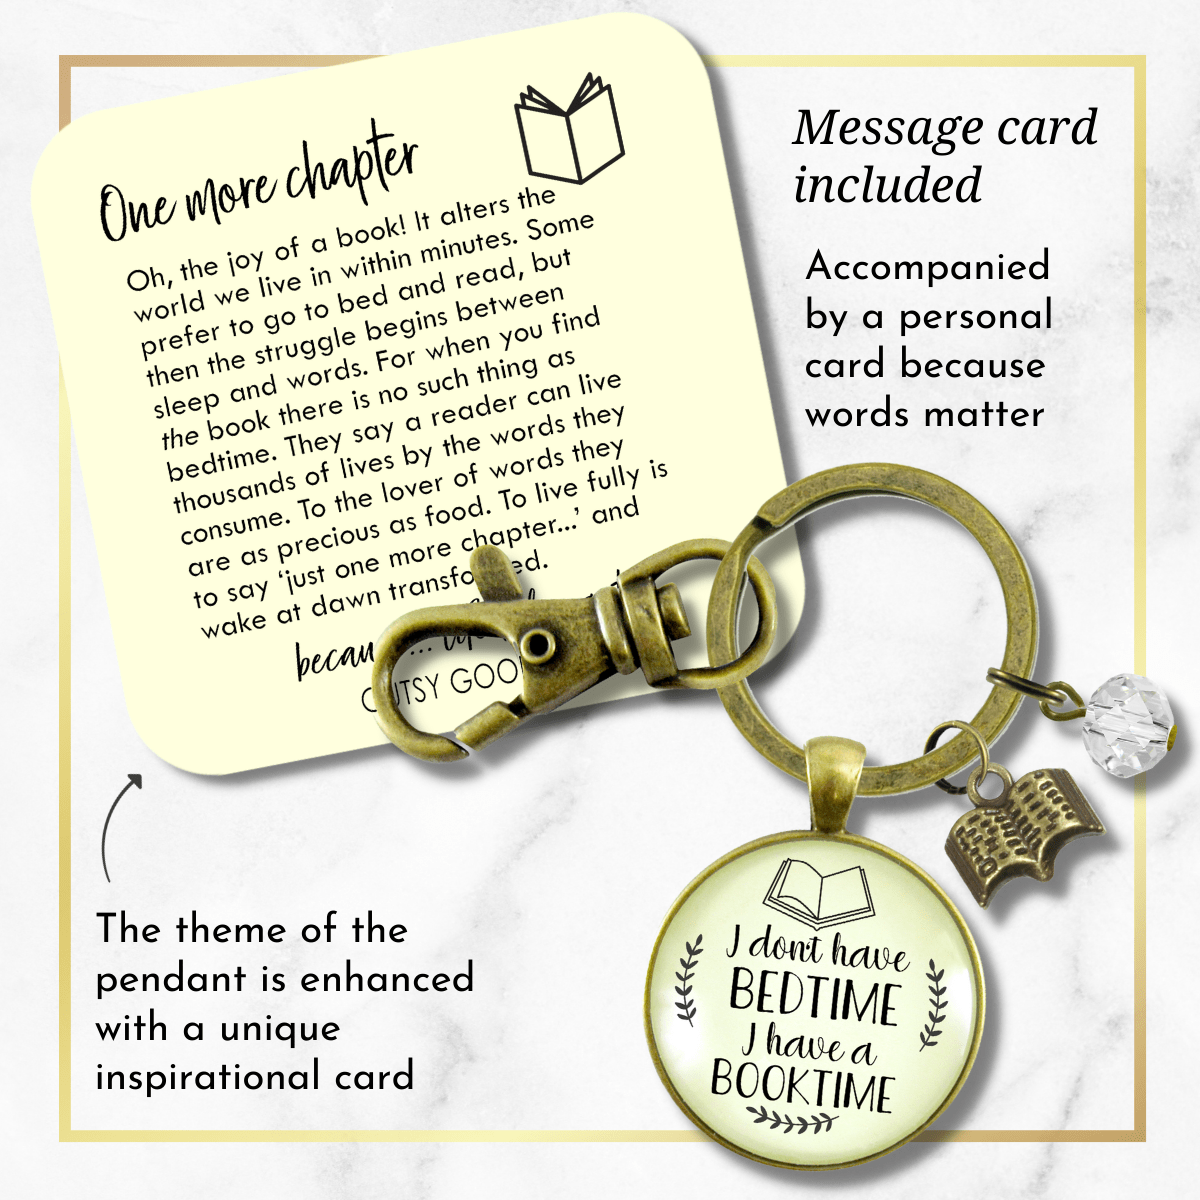 Book Lovers Keychain I Don't Have a Bedtime Booktime Bookworm Readers Jewelry Author Swag - Gutsy Goodness